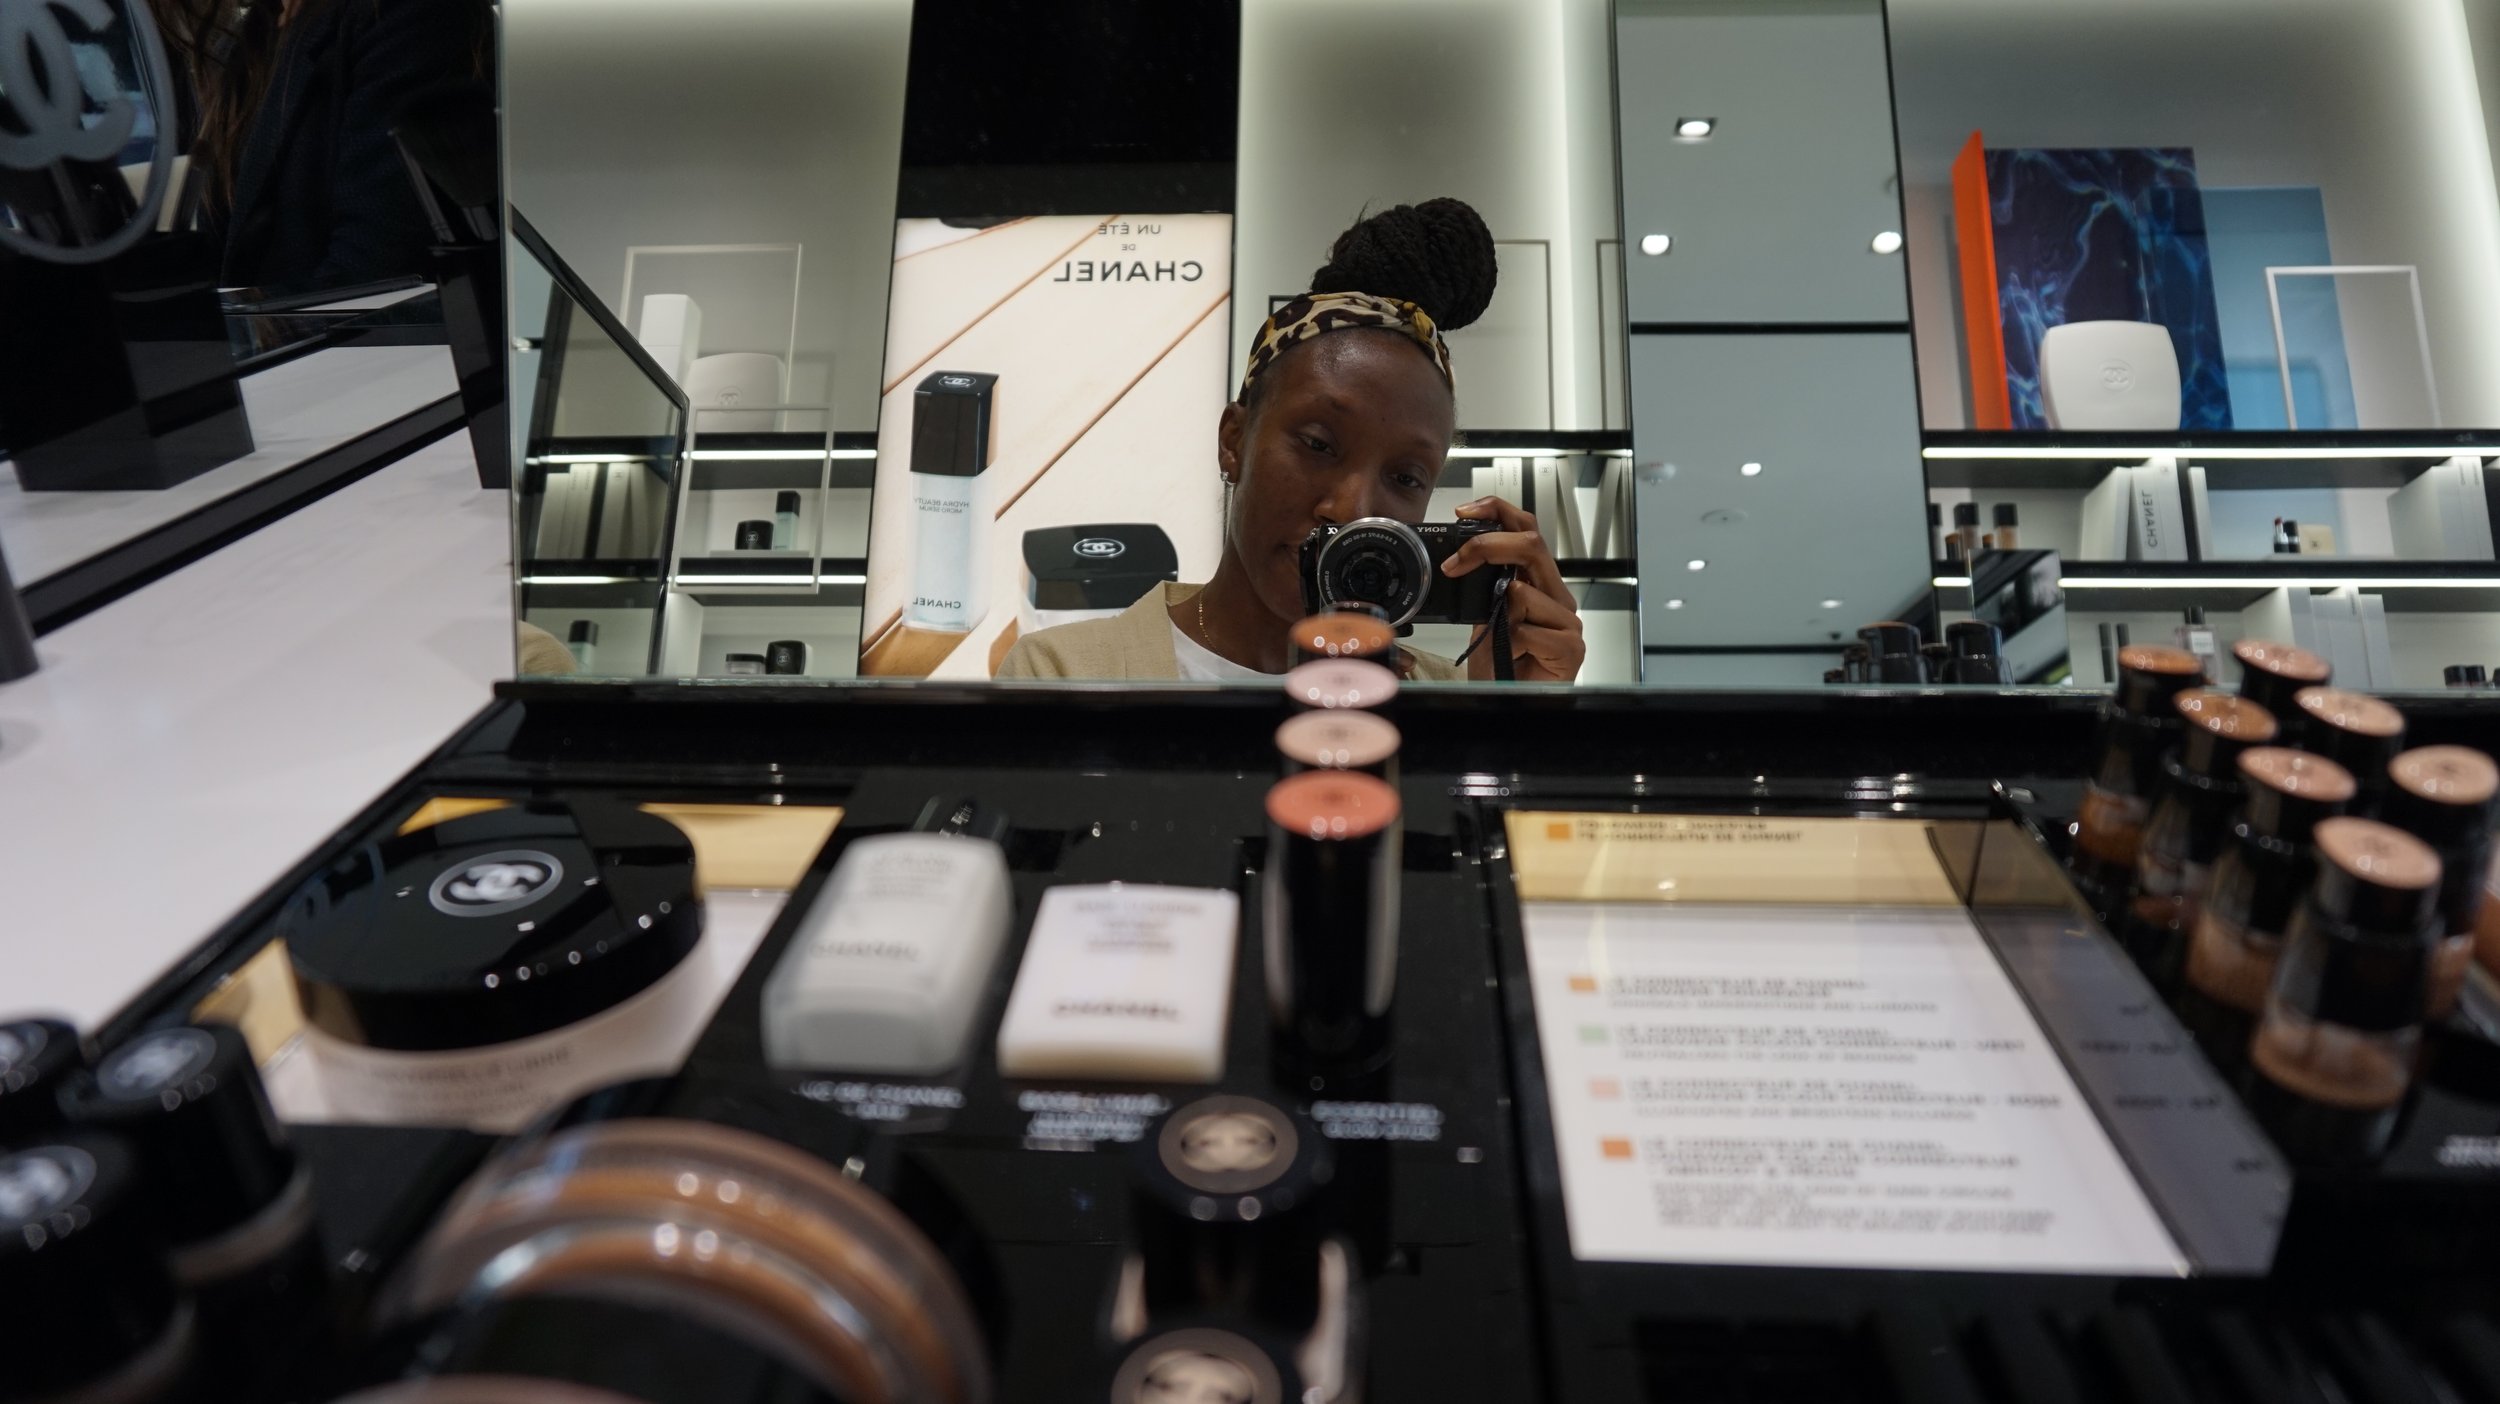 CHANEL Beauty and Fragrance Boutique is Now Open in Westfield UTC